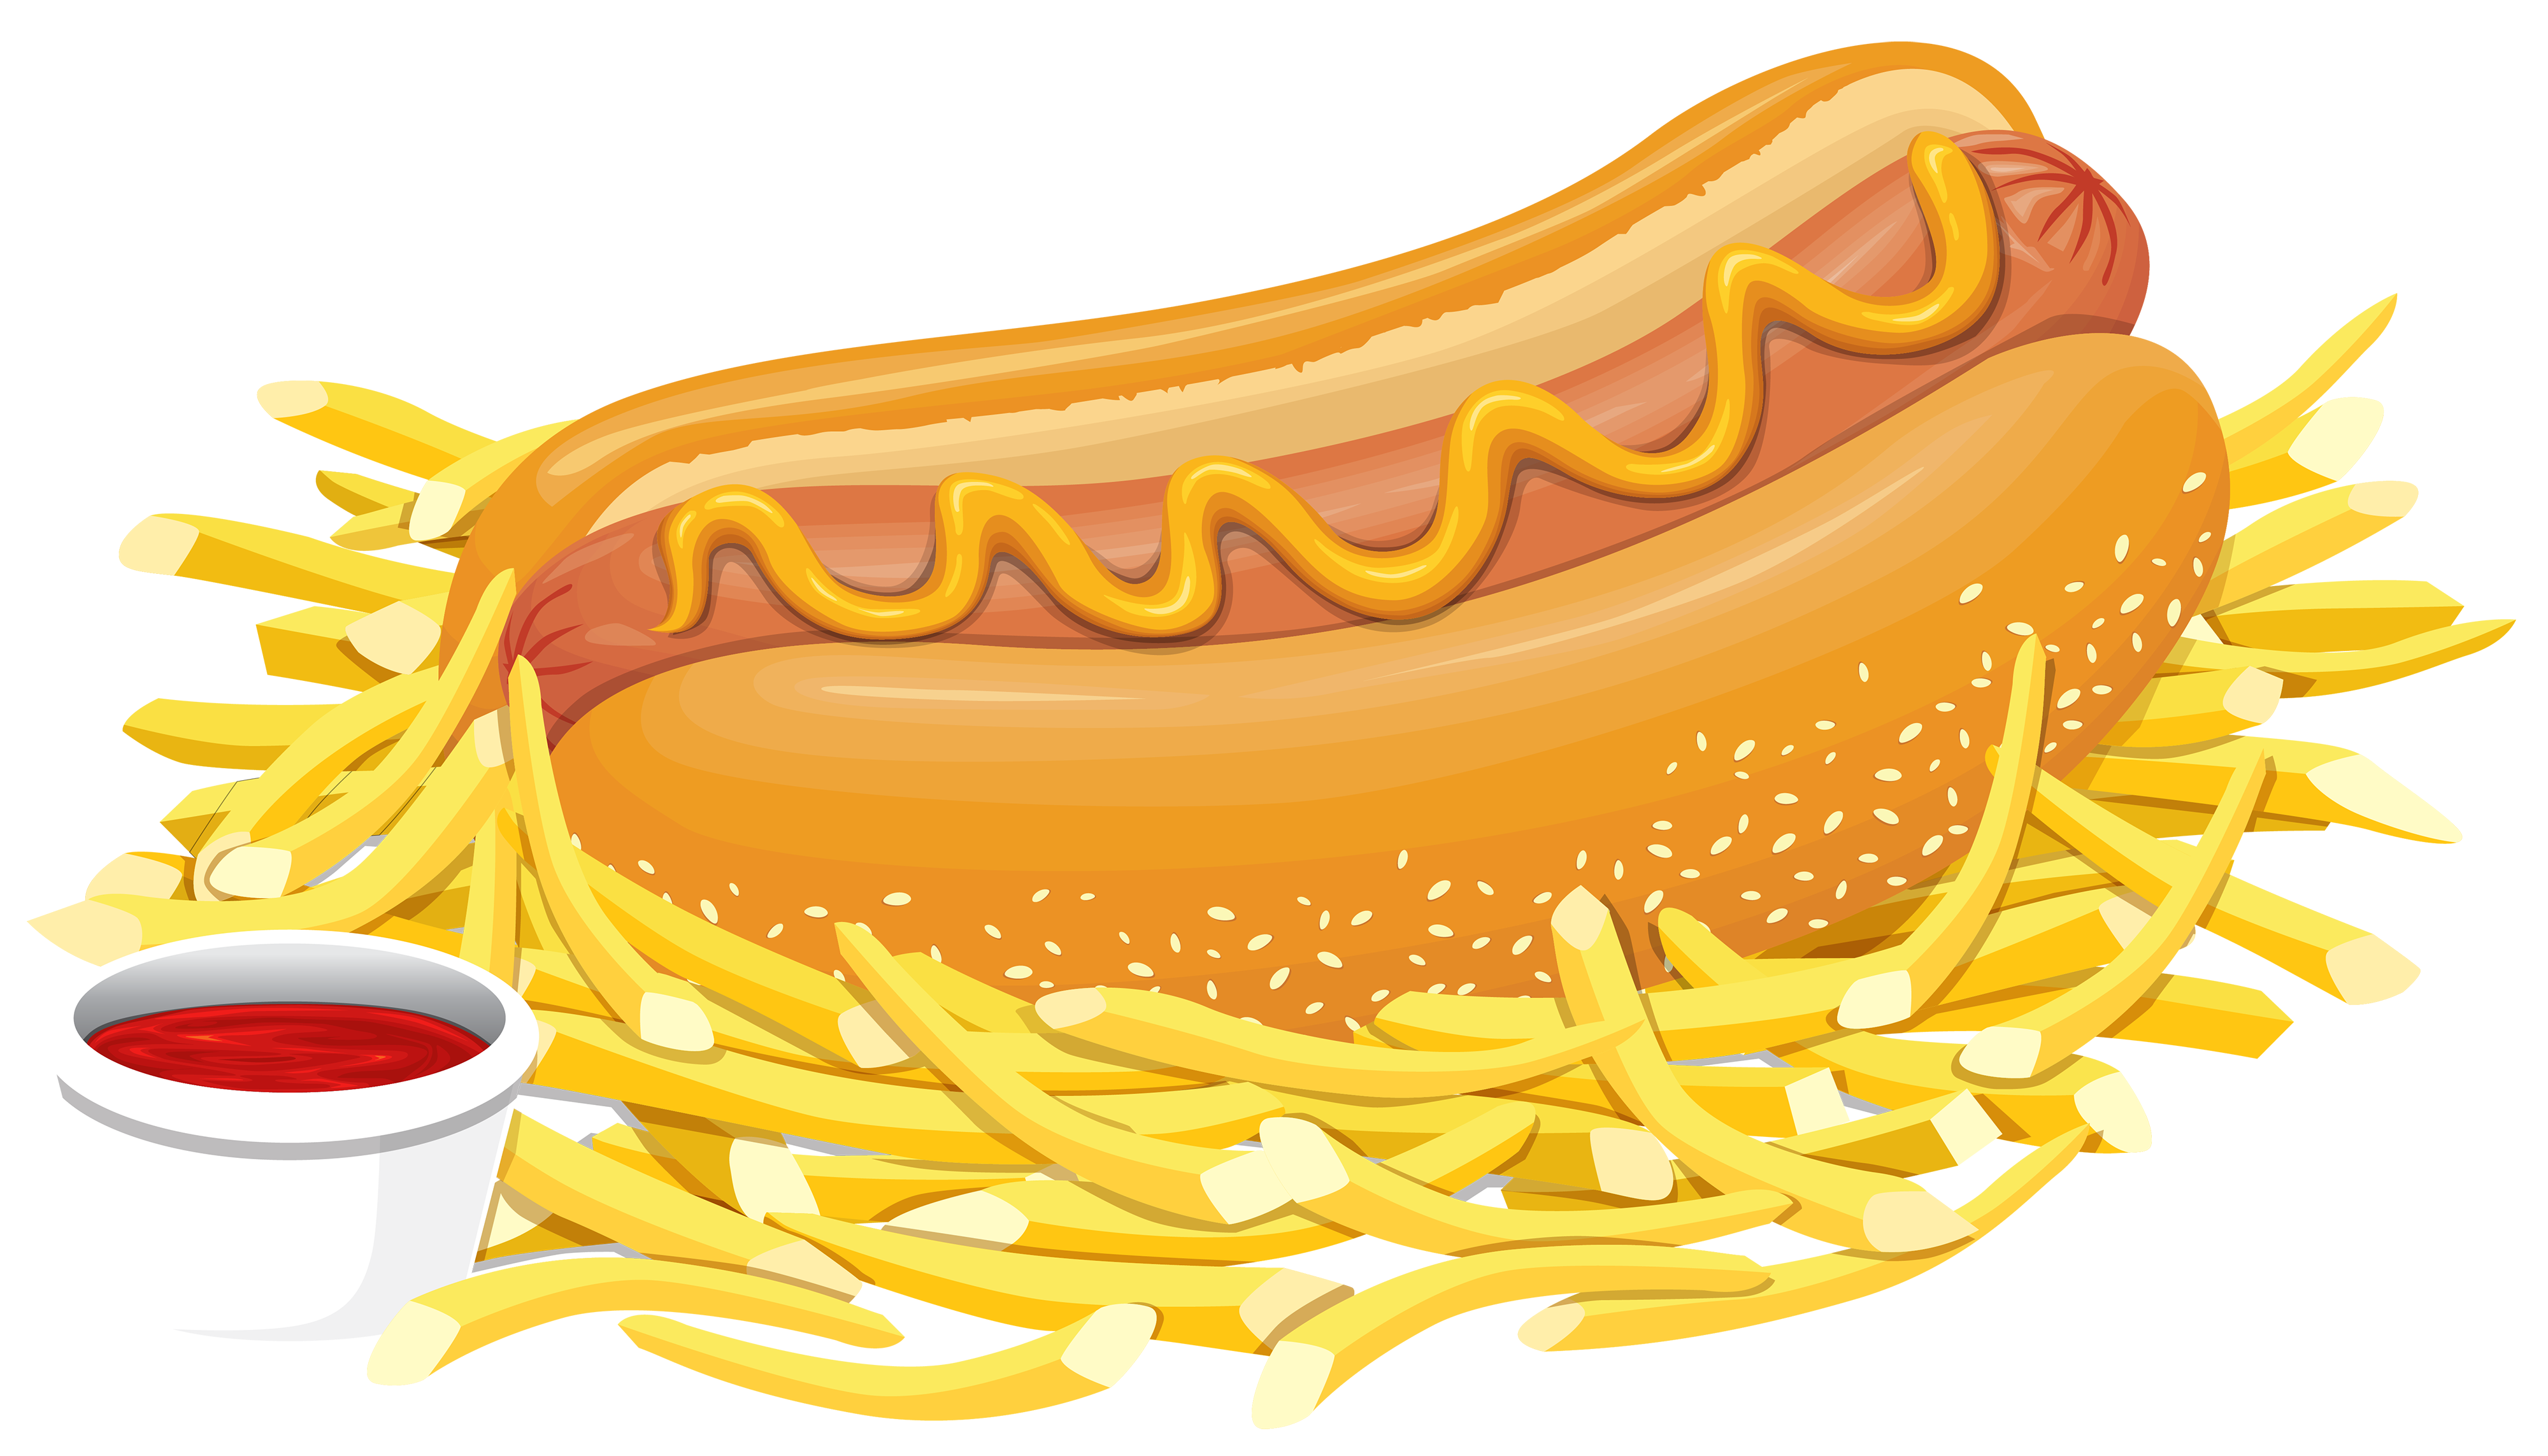 Hot dog with ketchup. Meal clipart food